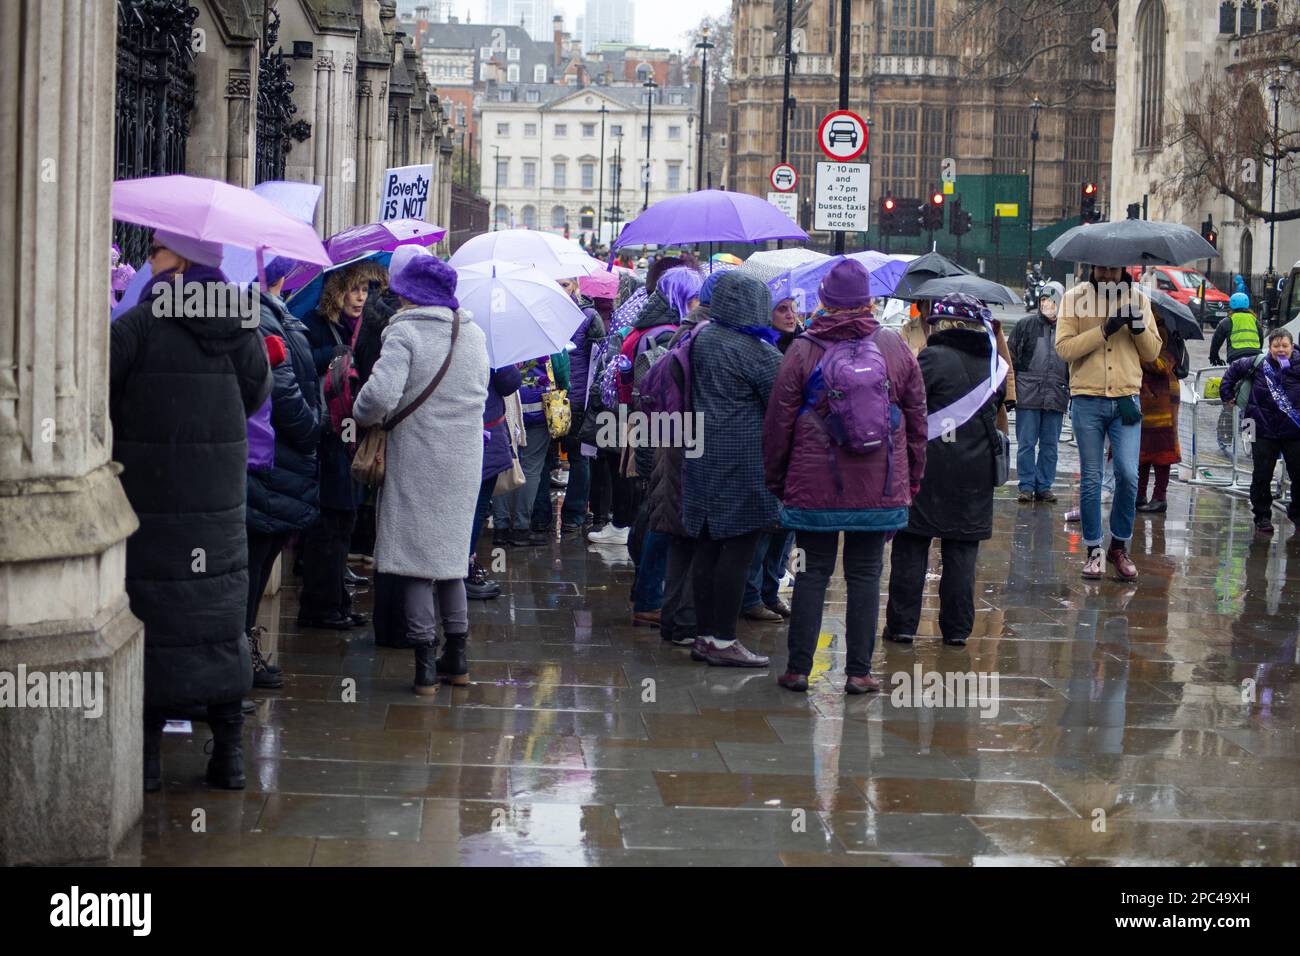 Women from WASPI-Women Against State Pension Inequality-protested against the change in retirement age. Credit: Sinai Noor/Alamy Stock Photo Stock Photo